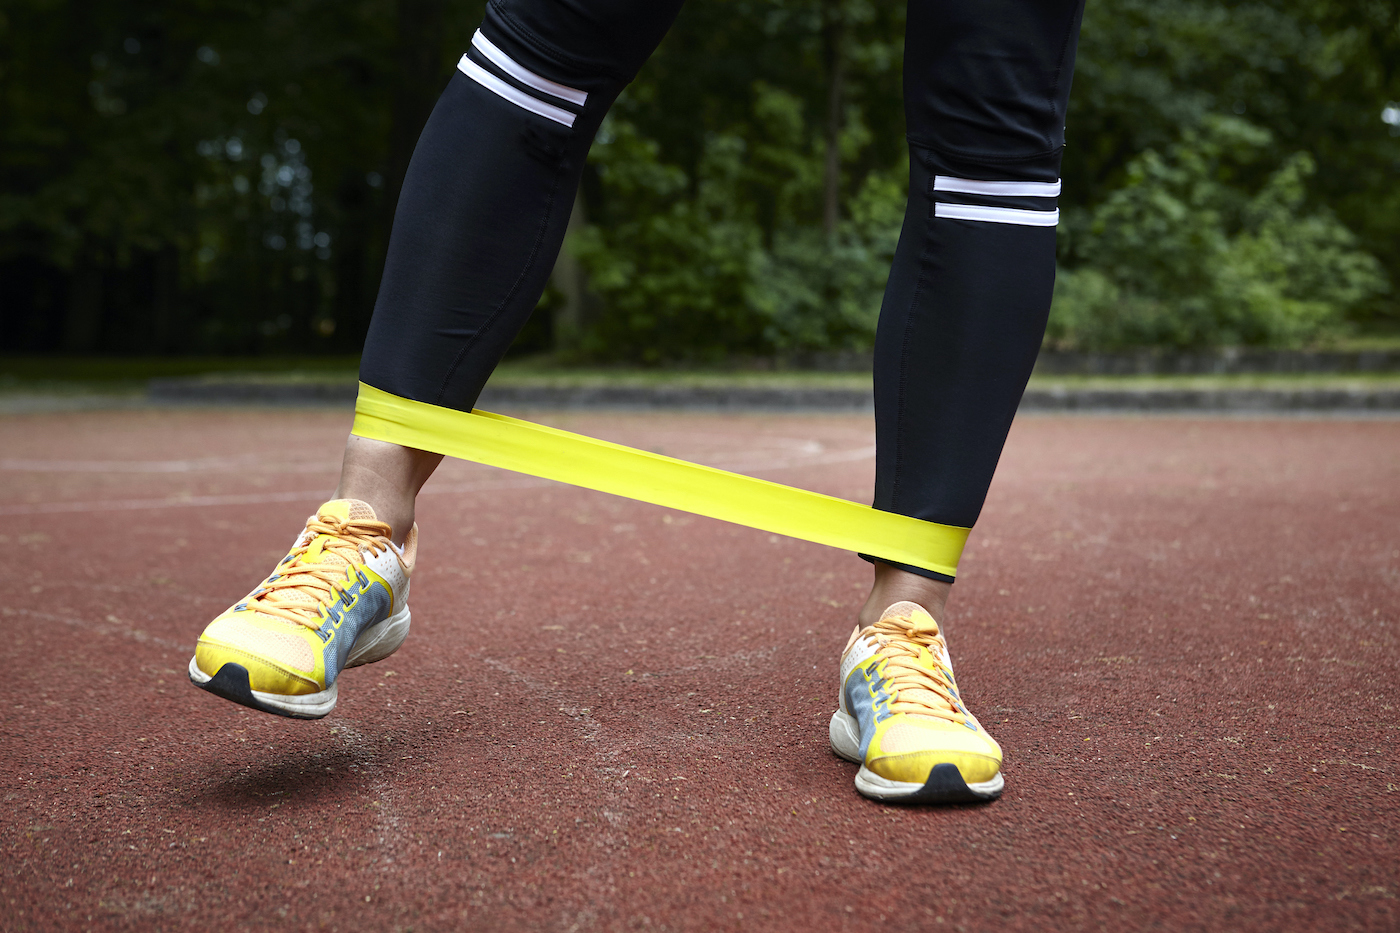 Resistance Band Workouts for Beginners: A Guide on Resistance Band